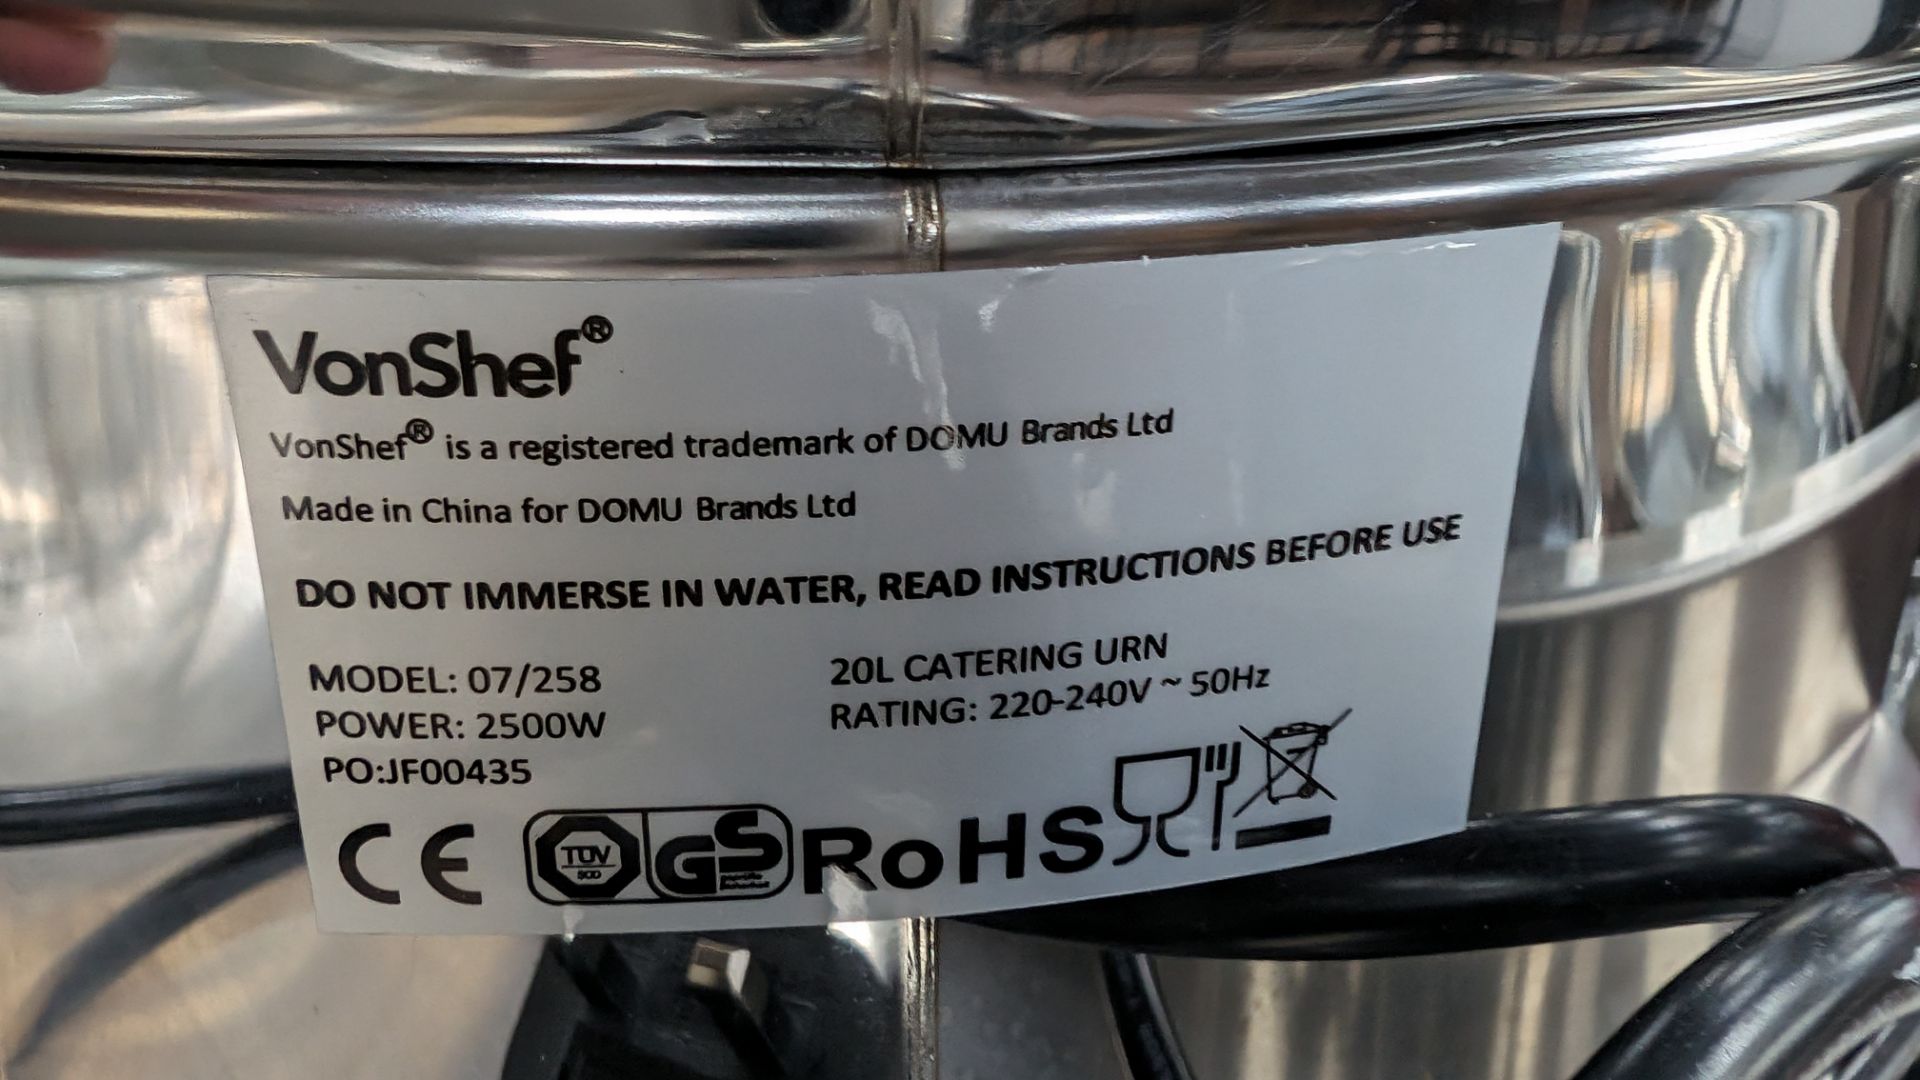 VonShef stainless steel hot water boiler/urn, 2500w, 20L, model 07/258. Includes drip tray and orig - Image 7 of 7